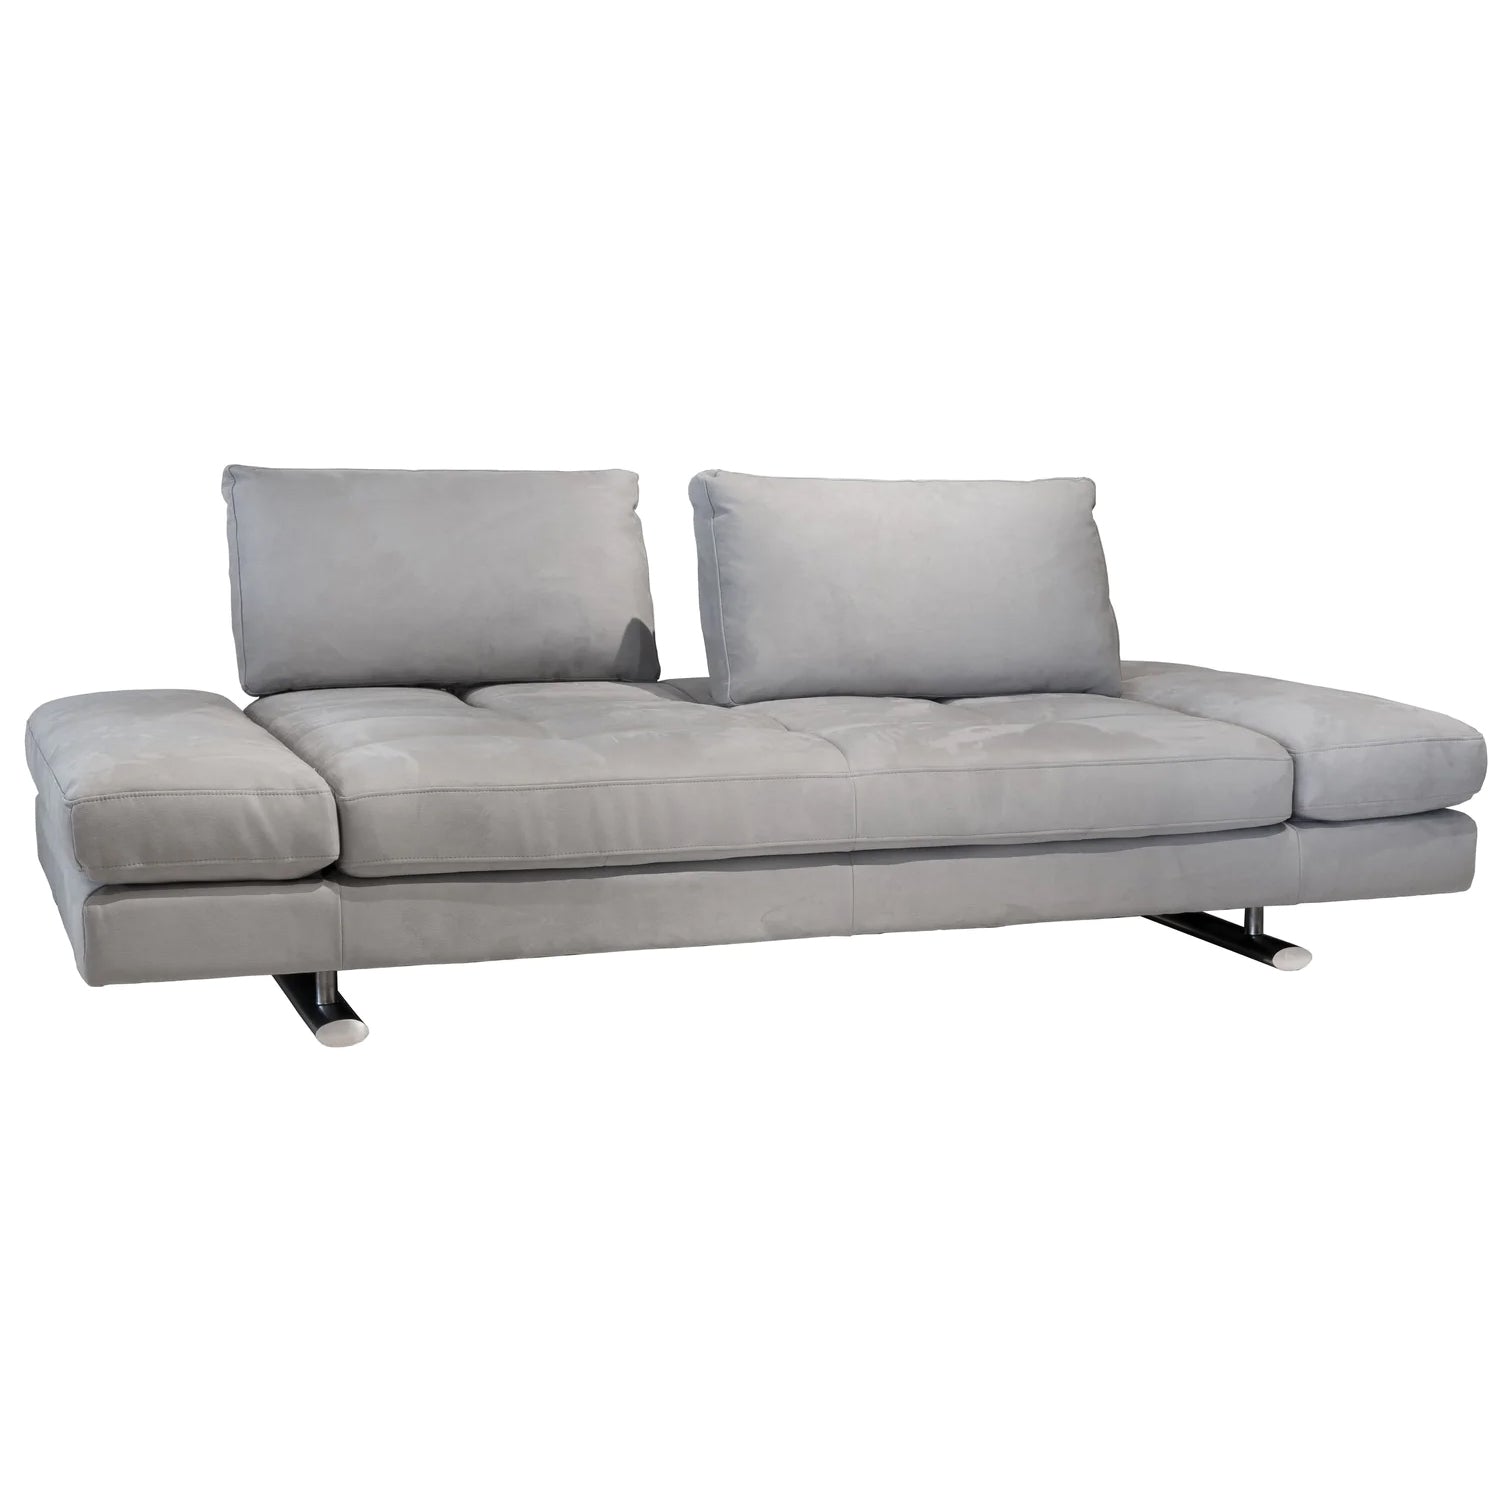 1372 Movable Back Loveseat - Grey Fabric